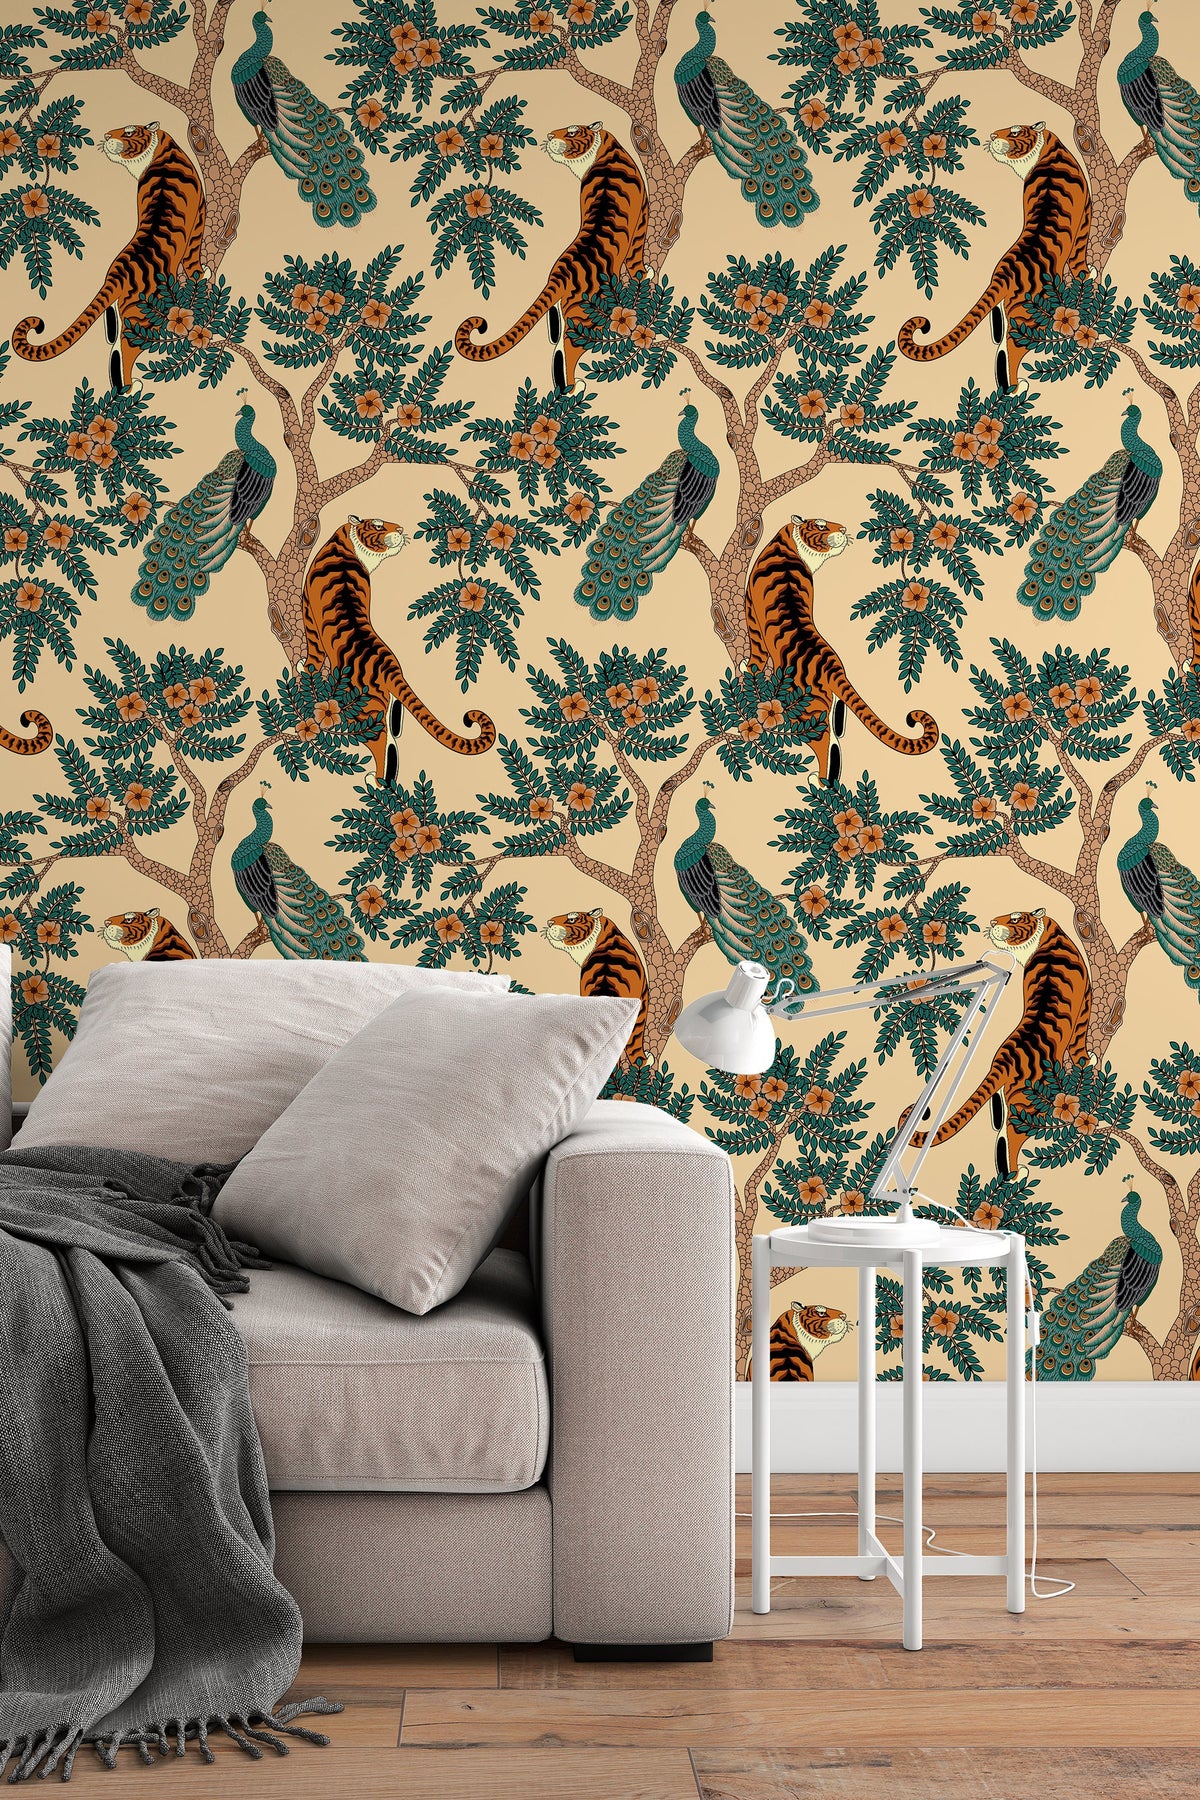 Peacock Pattern Peel and Stick Wallpaper  On Sale   32617228